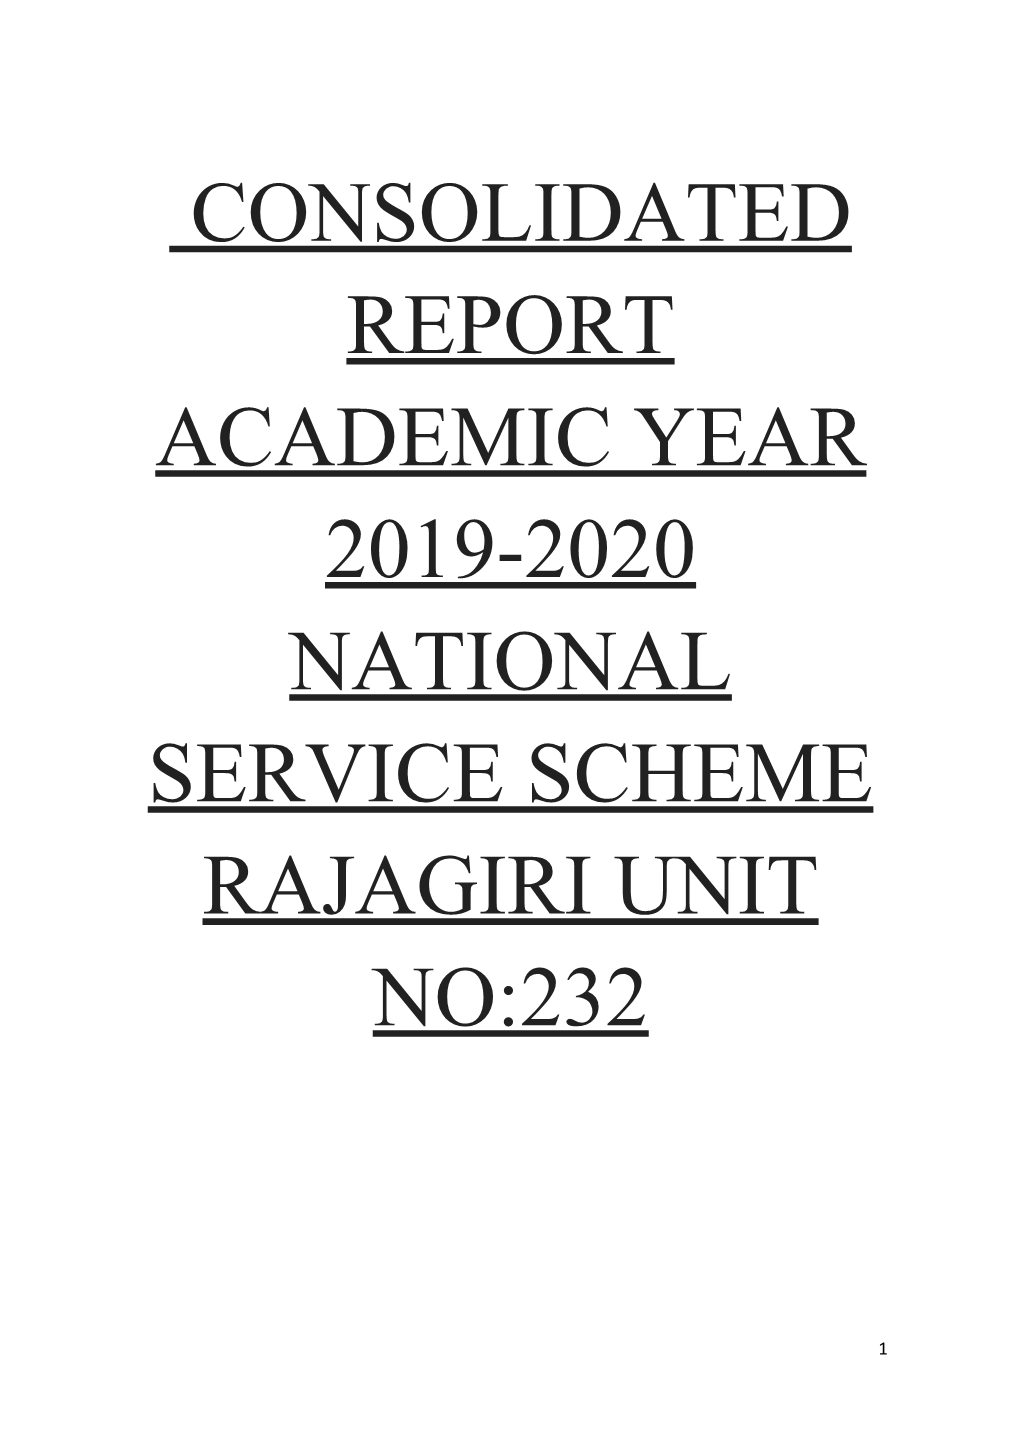 Consolidated Report Academic Year 2019-2020 National Service Scheme Rajagiri Unit No:232